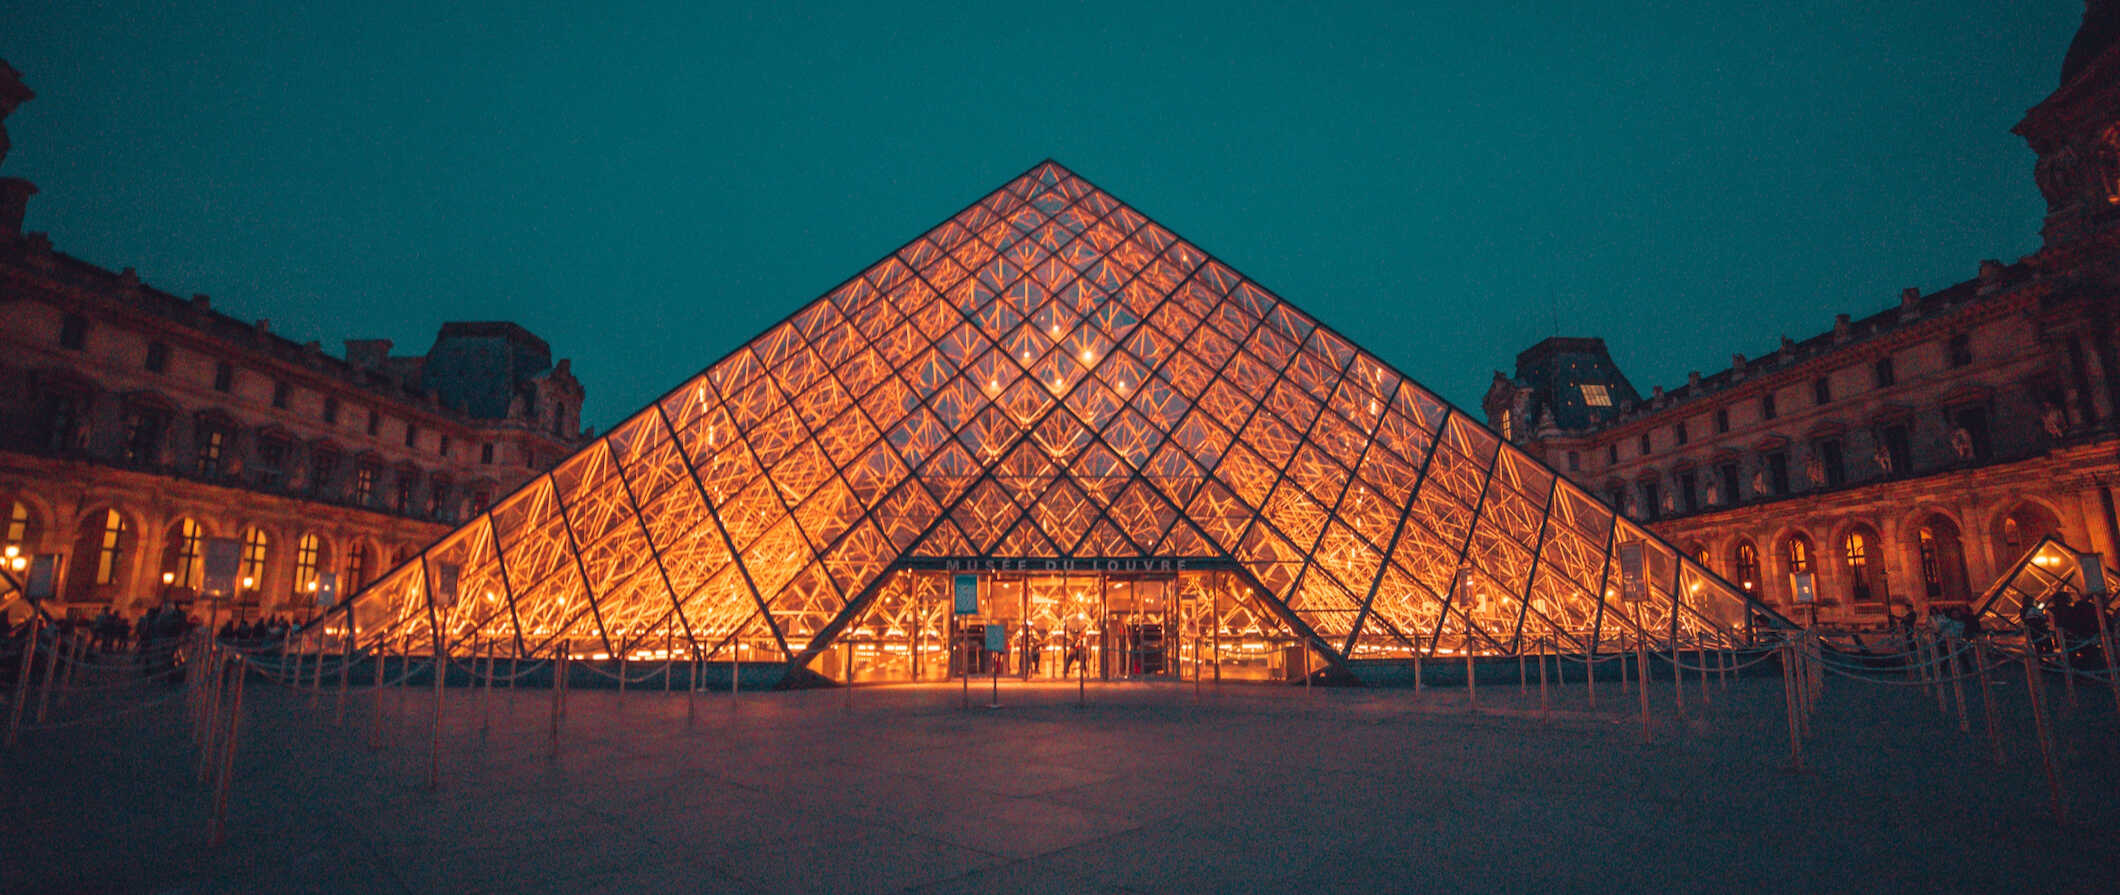 The Louvre pyramid lit up at night in Paris, France